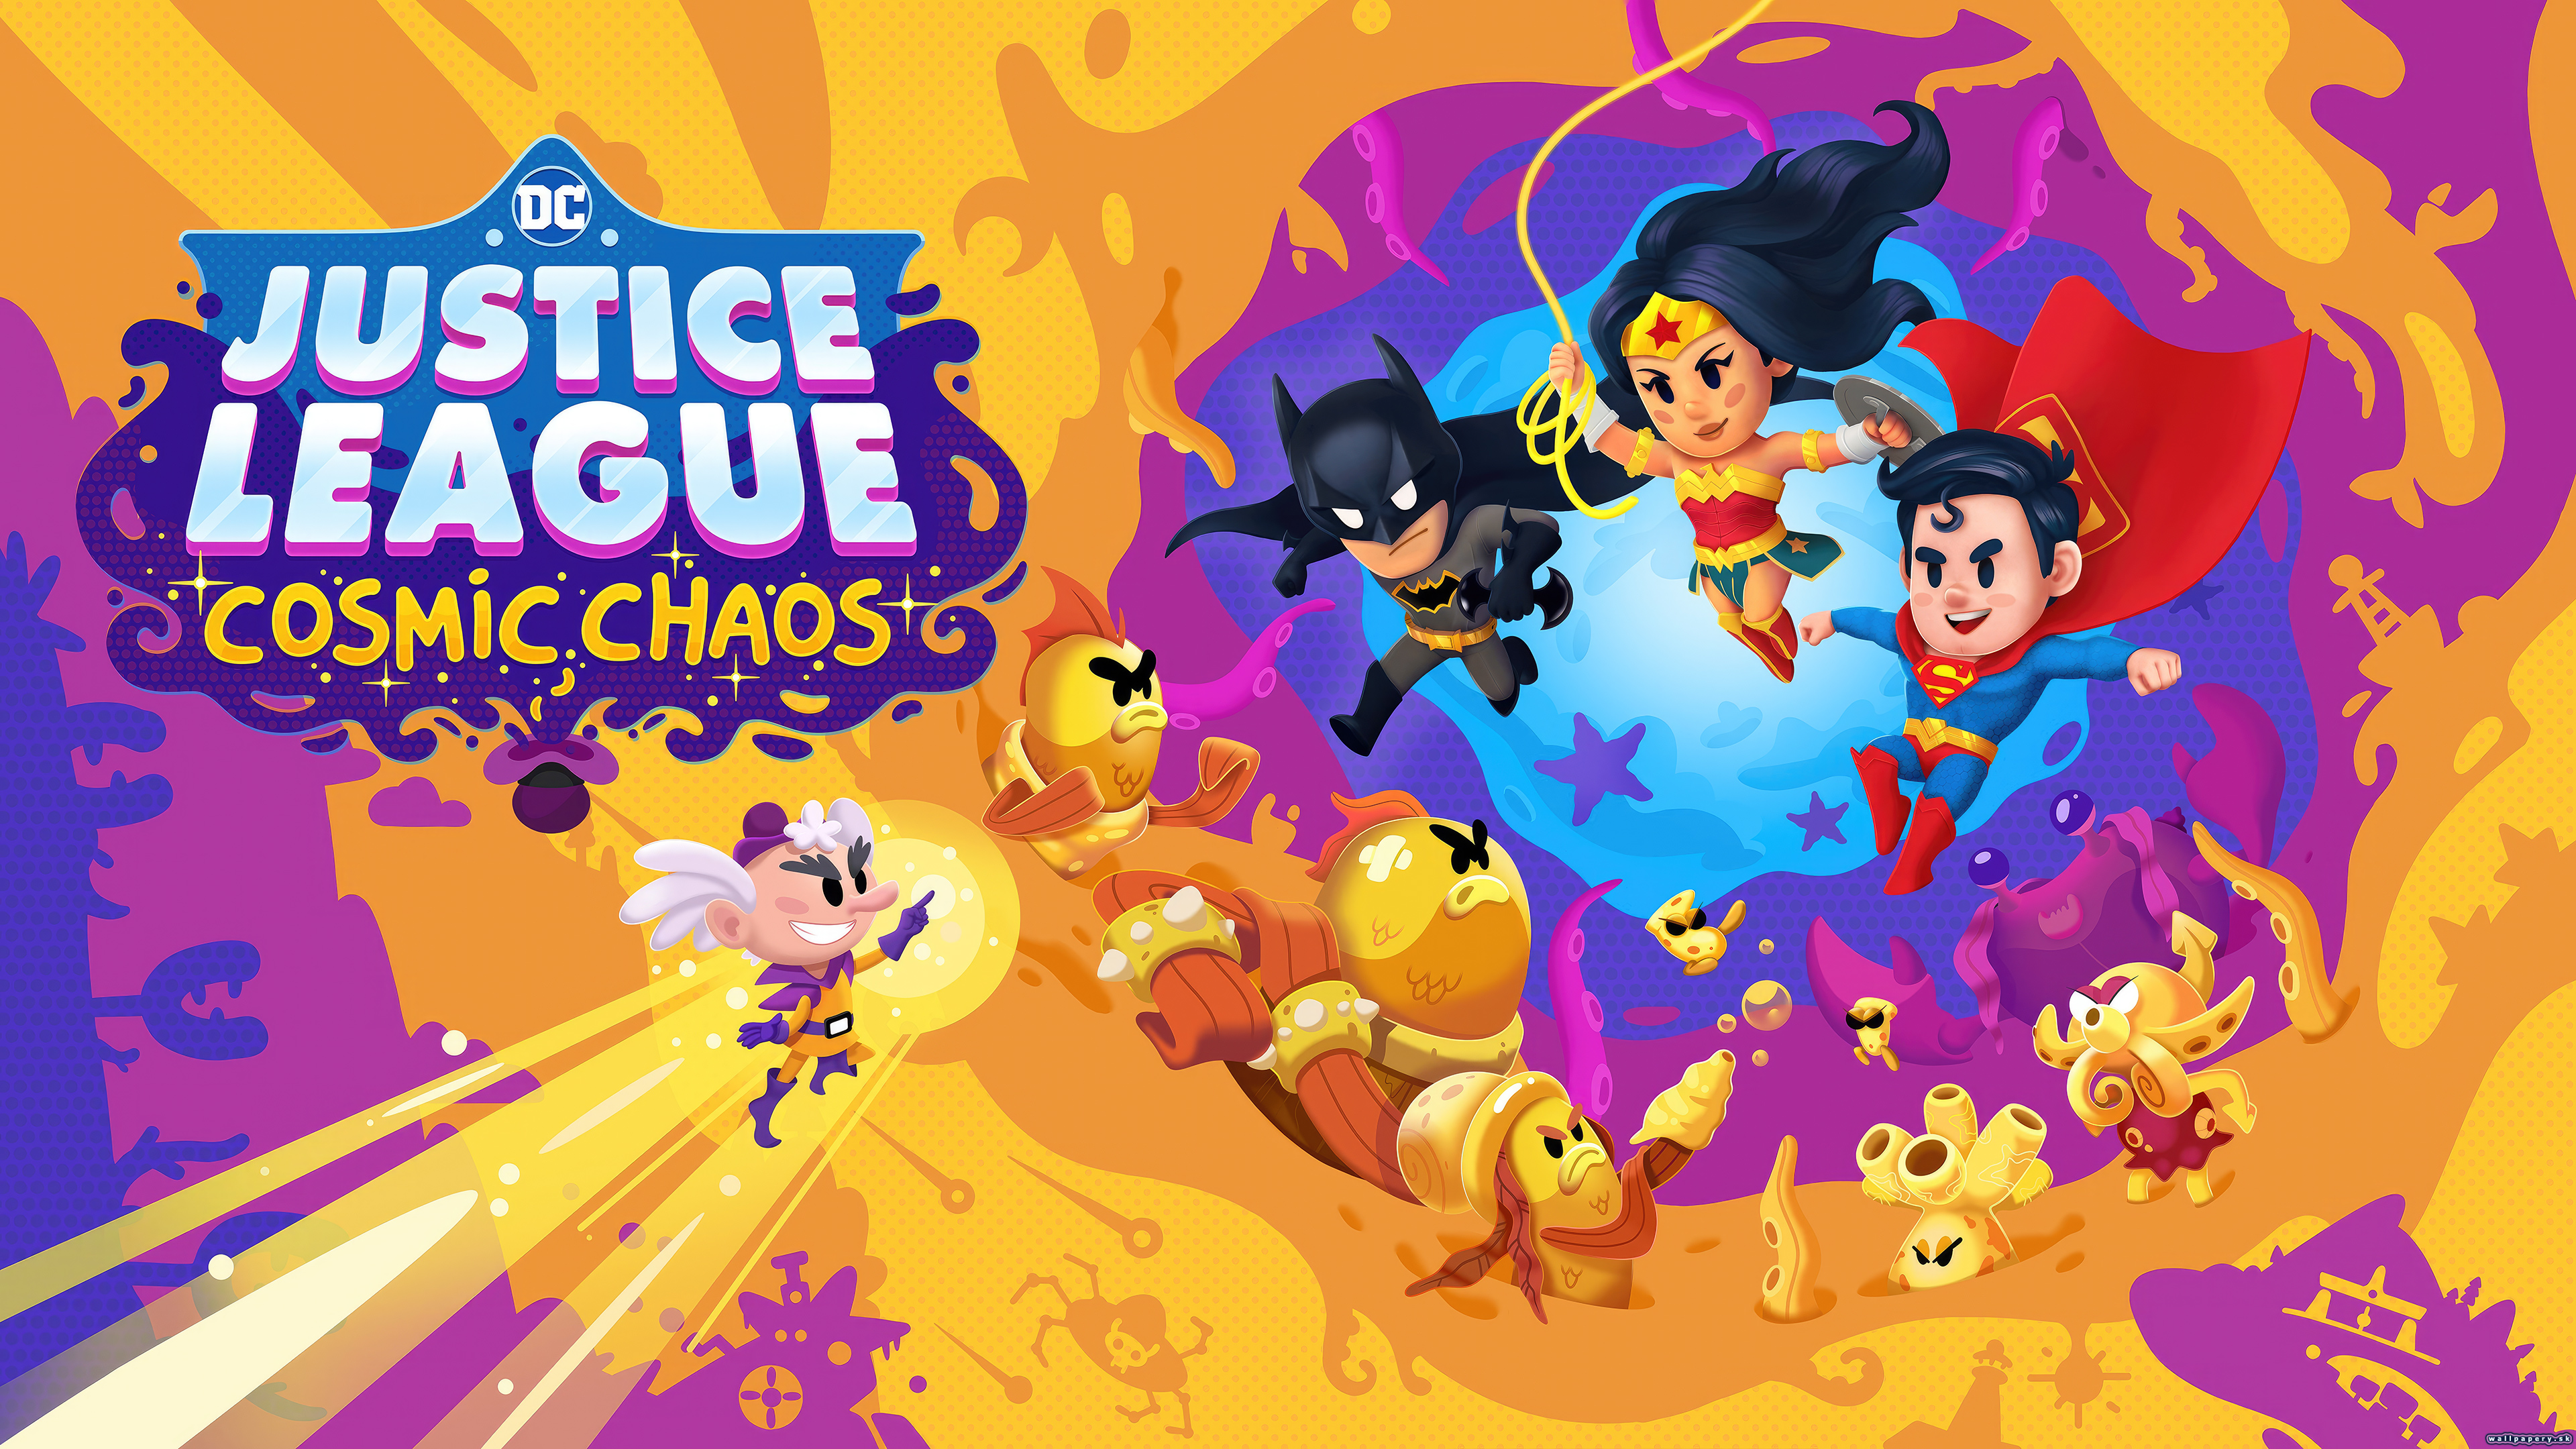 DC's Justice League: Cosmic Chaos - wallpaper 1